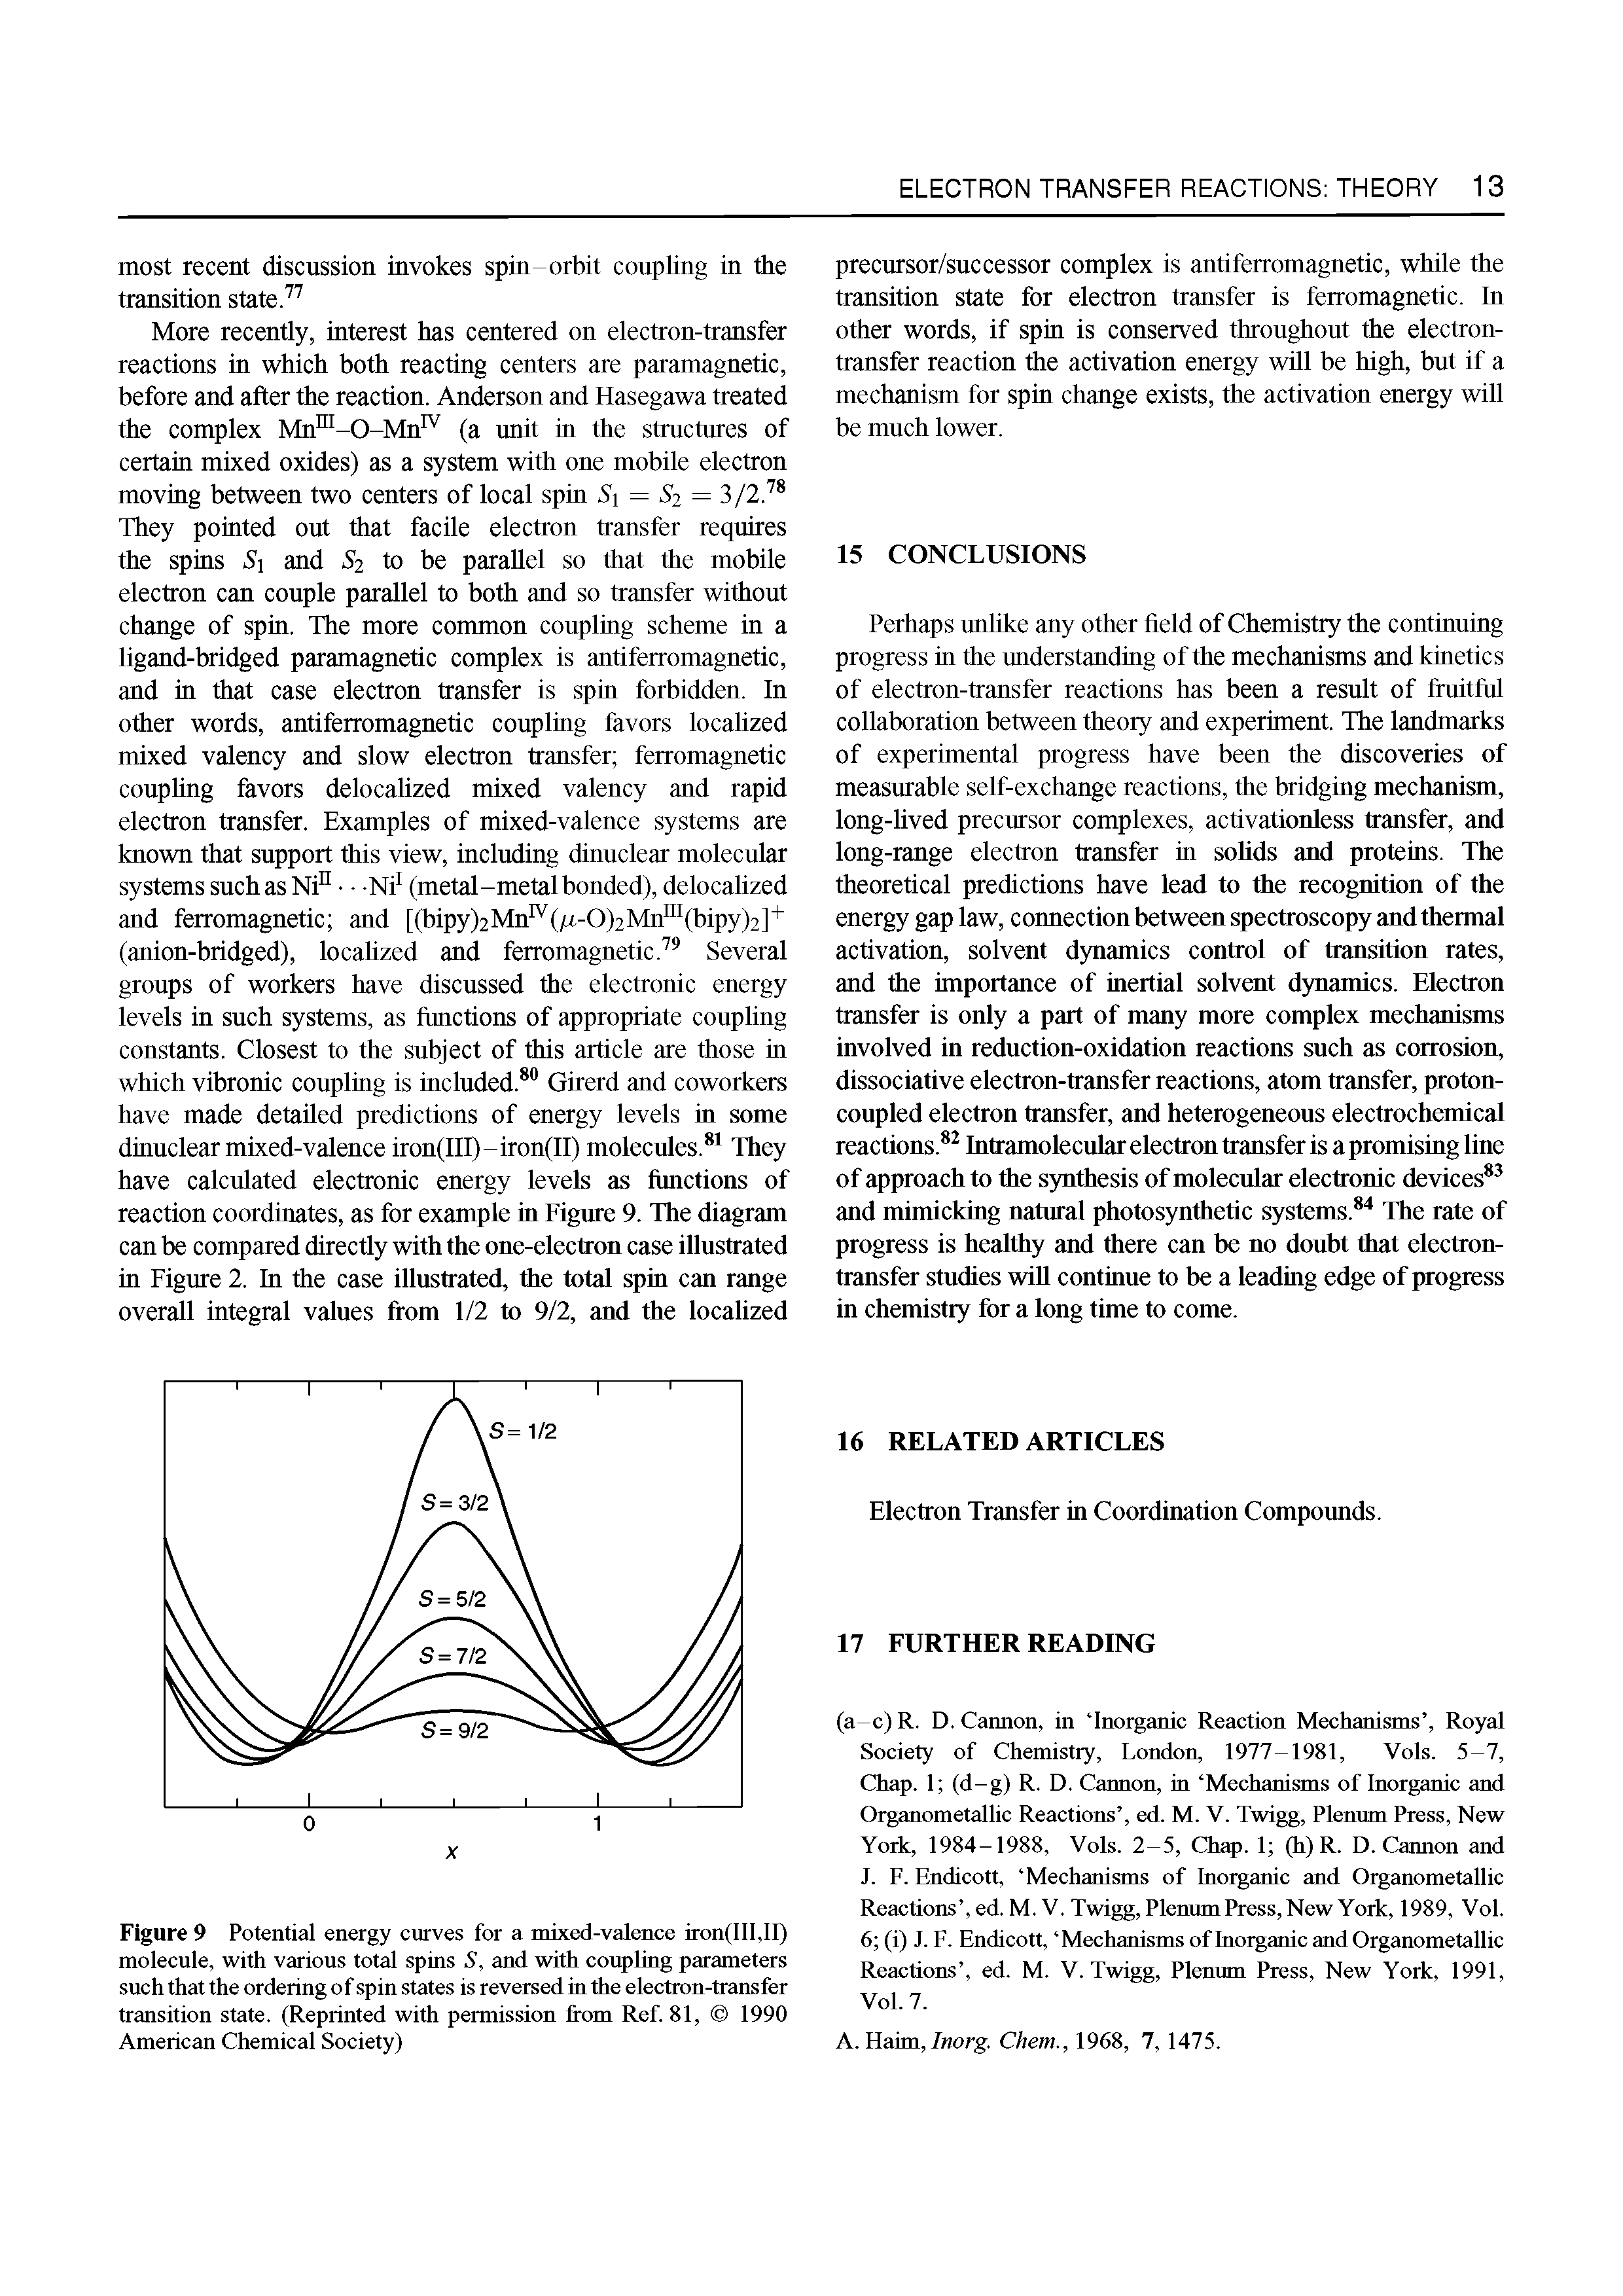 Figure 9 Potential energy curves for a mixed-valence iron(III,II) molecule, with various total spins S, and with coupling parameters such that the ordering of spin states is reversed in the electron-transfer transition state. (Reprinted with permission from Ref. 81, 1990 American Chemical Society)...